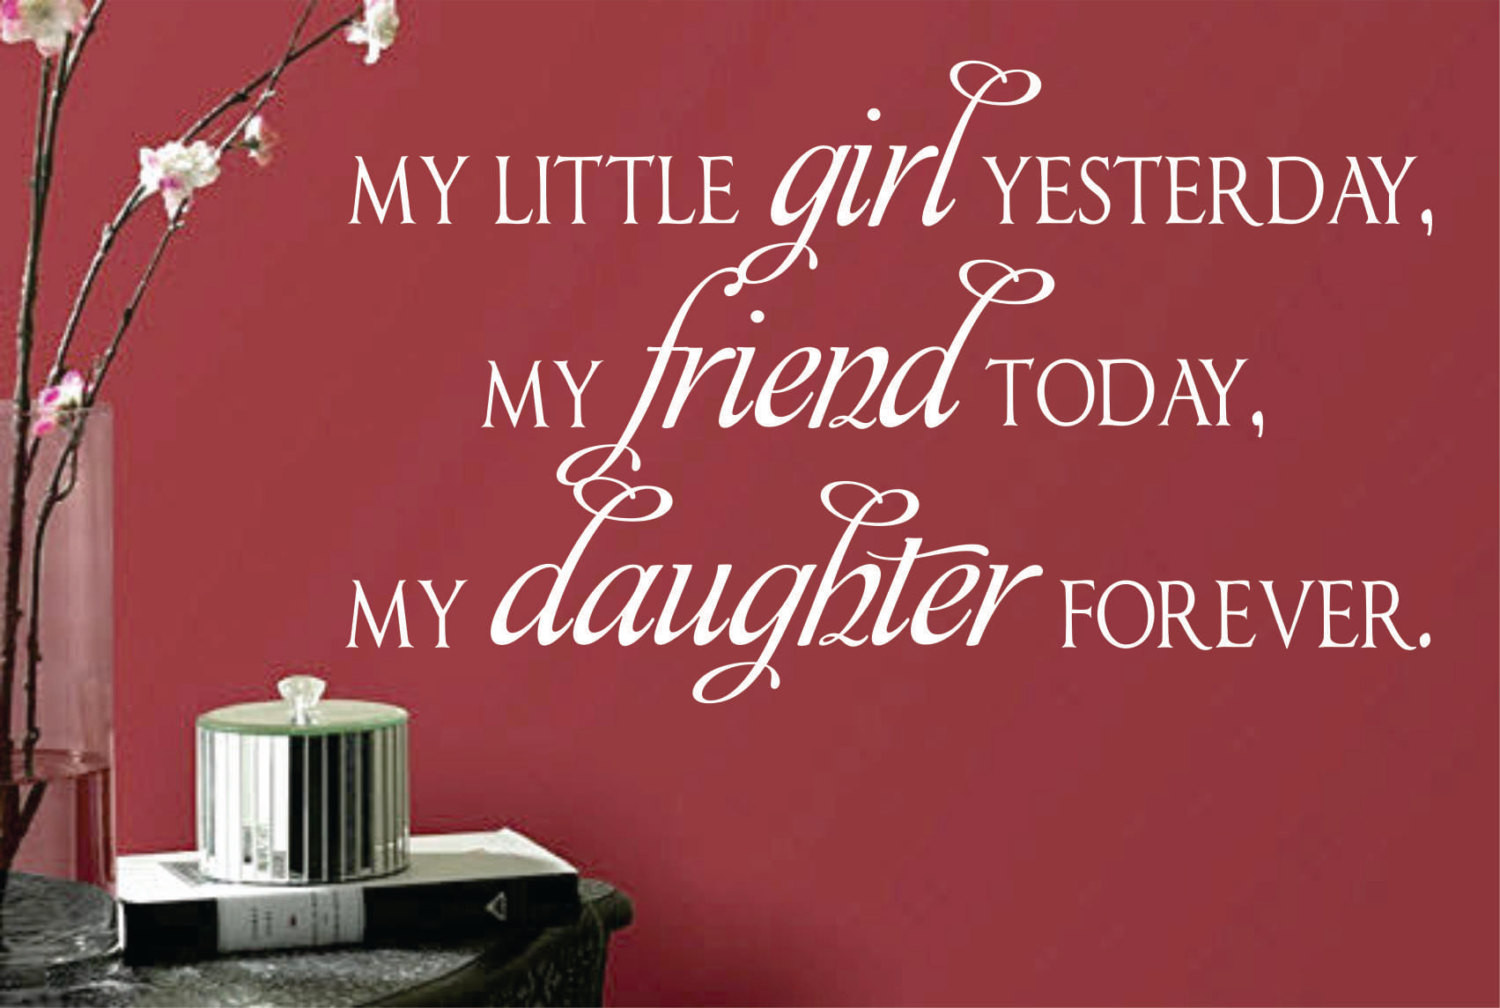 Motivational Quotes For Daughter
 Vinyl Wall Lettering Daughter Forever by WallsThatTalk on Etsy